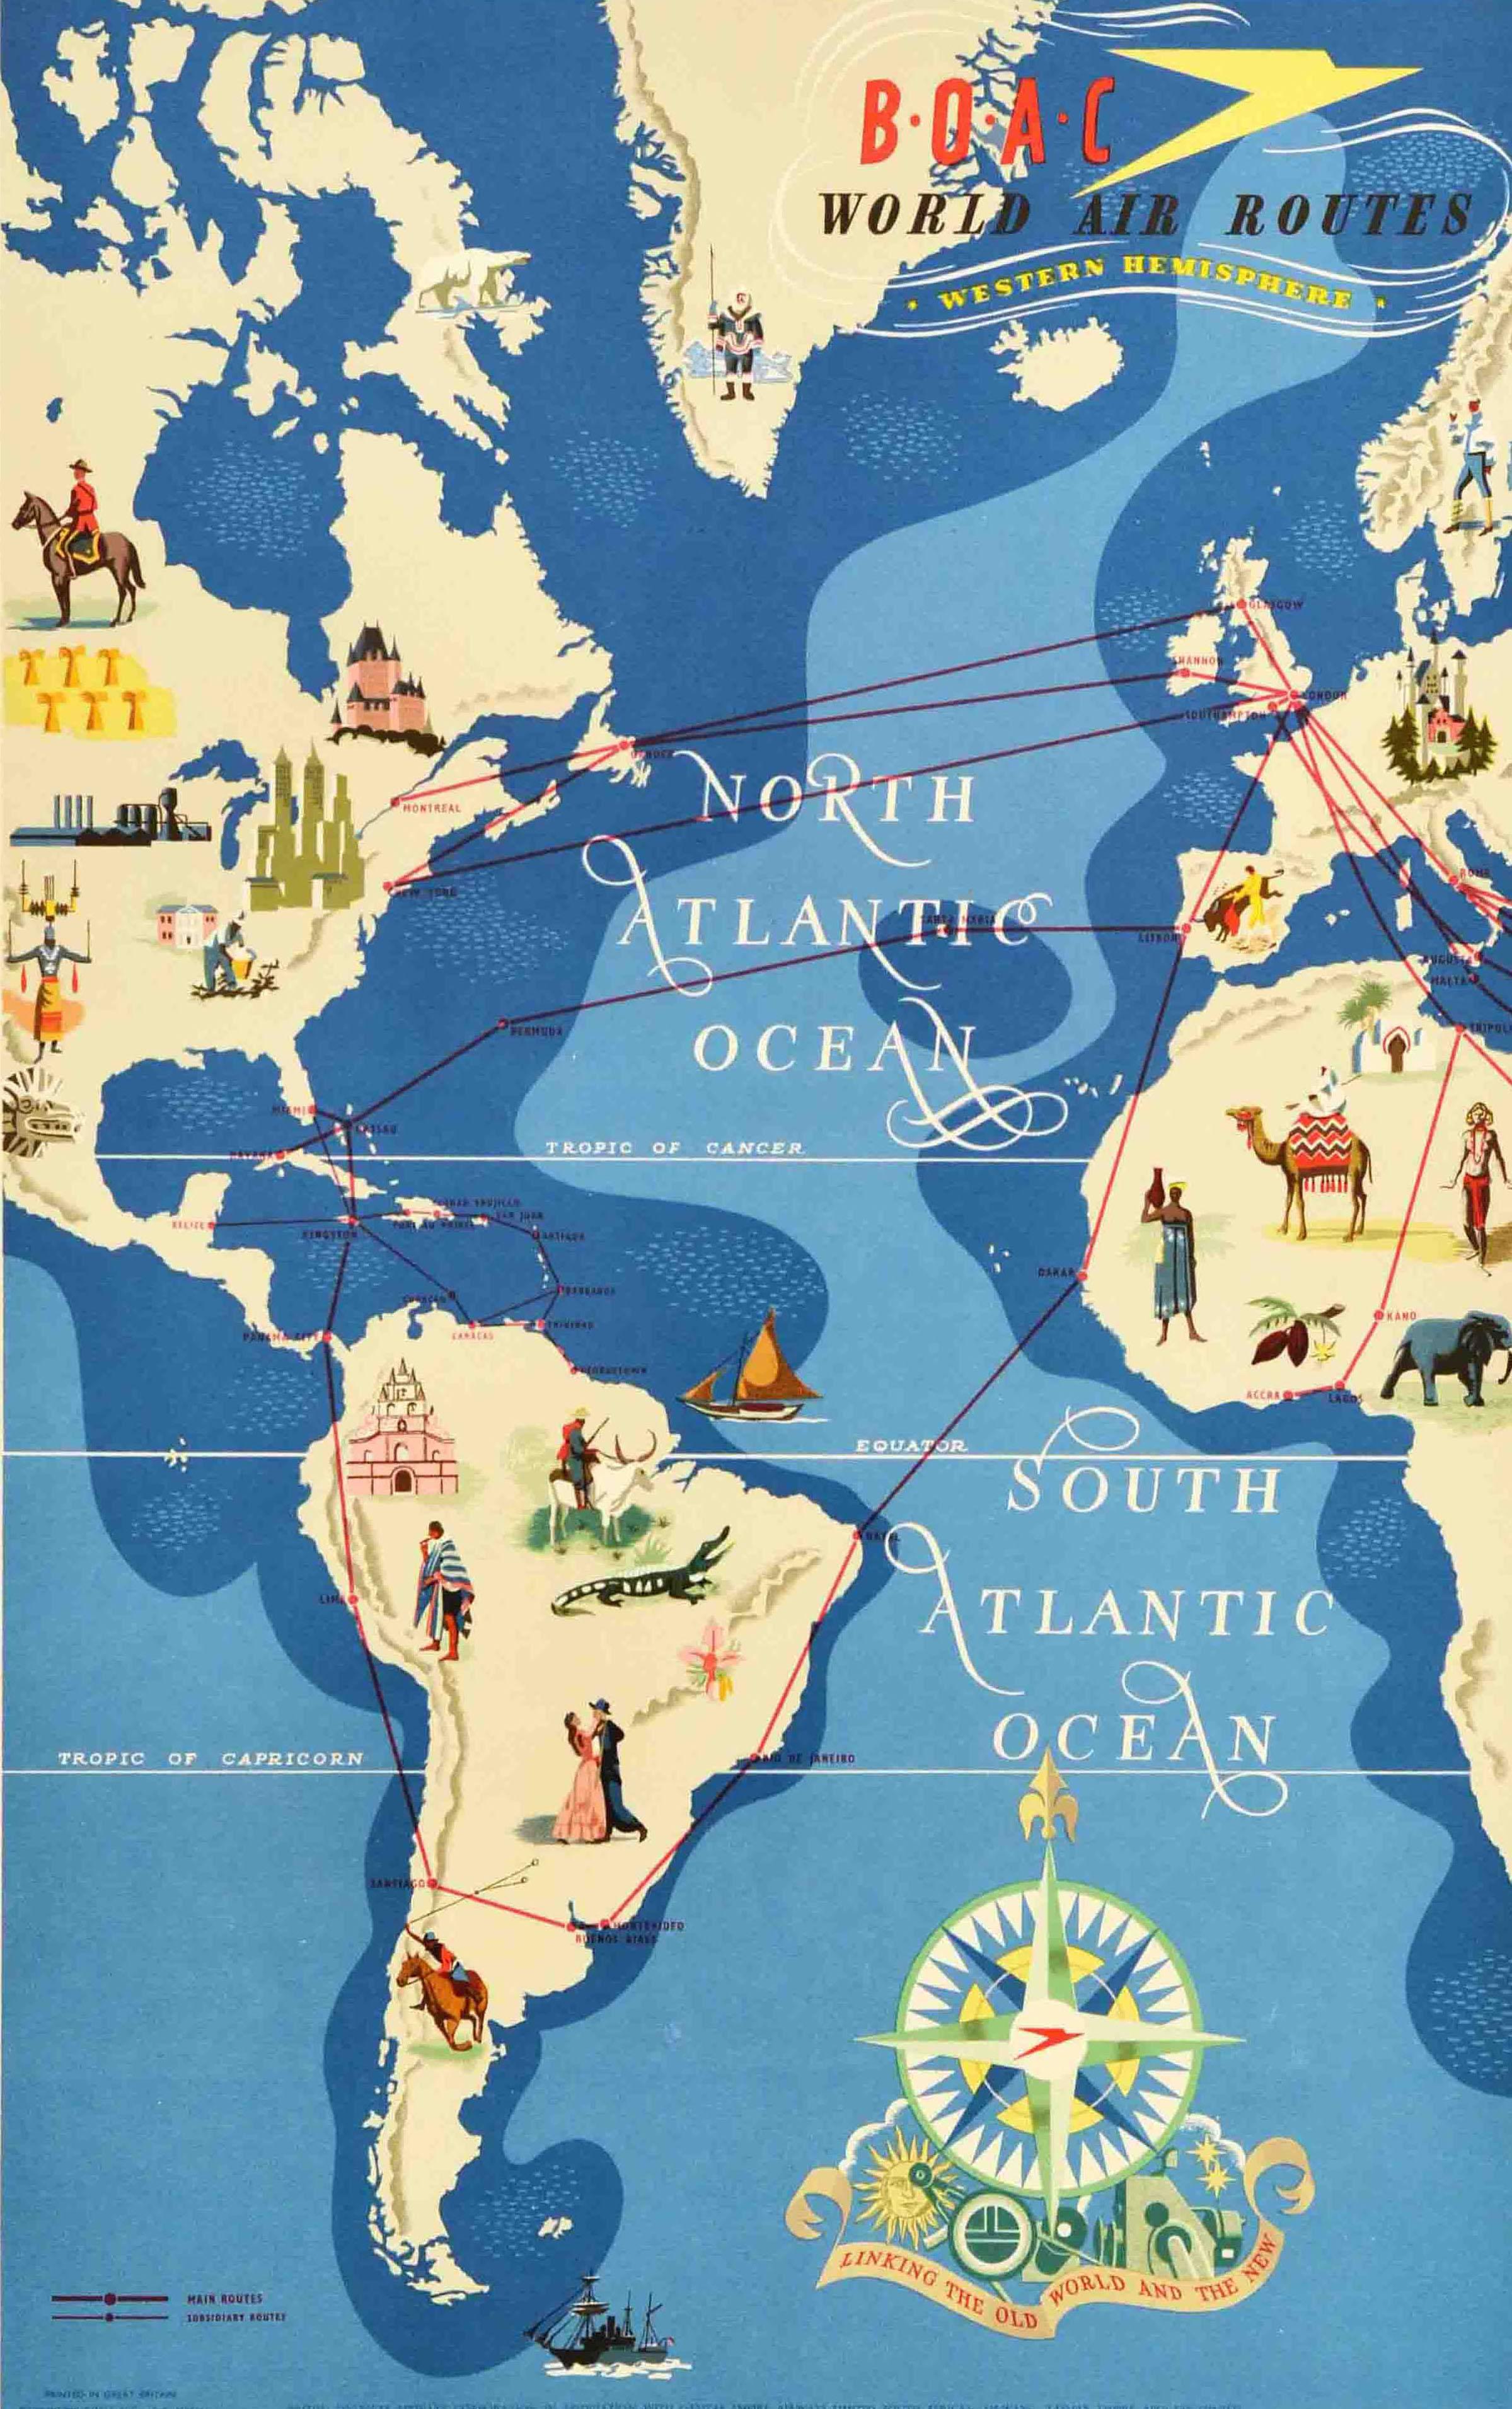 Original vintage travel advertising poster for BOAC World Air Routes Western Hemisphere featuring a pictorial map with colourful illustrations of people in national dress, places of historic interest, mountain ranges, animals and ships at sea with a